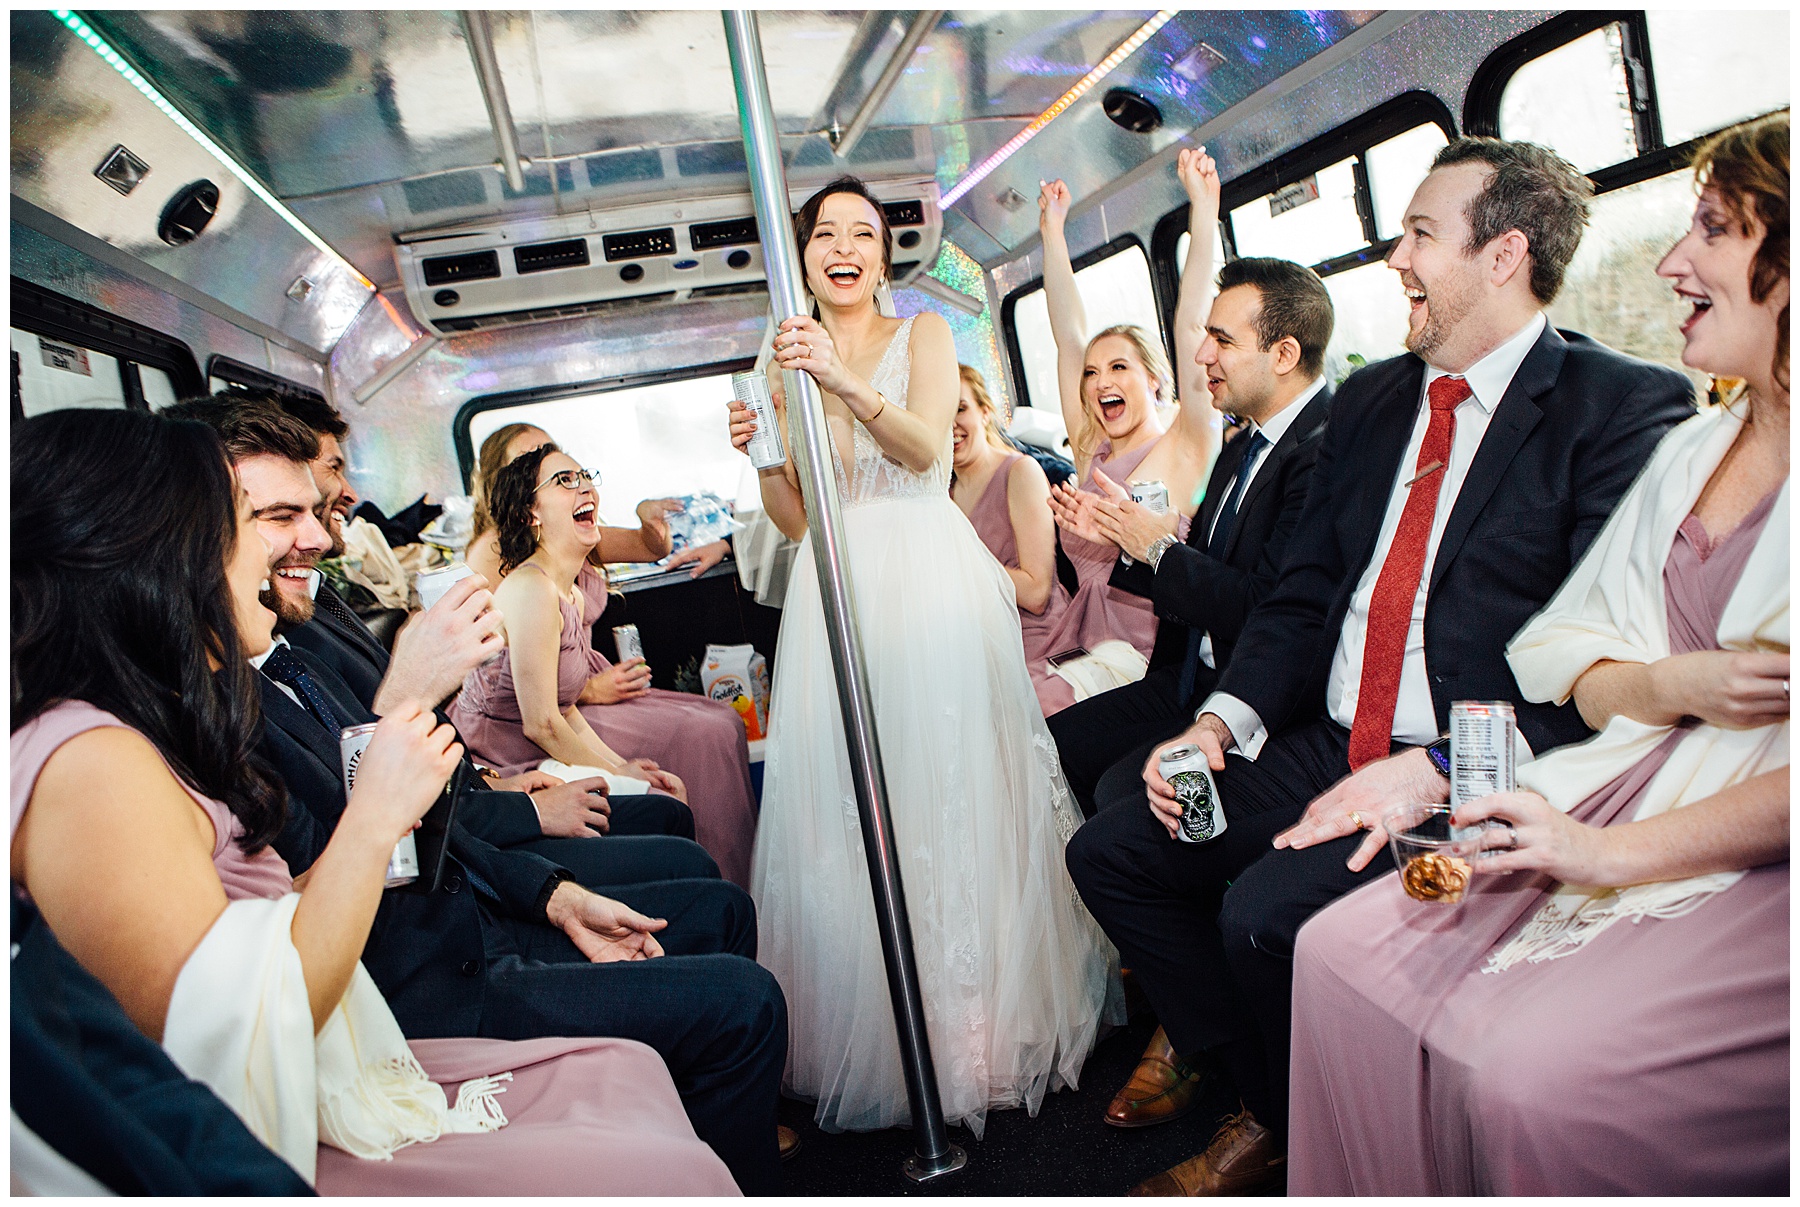 Bride on party bus with wedding party